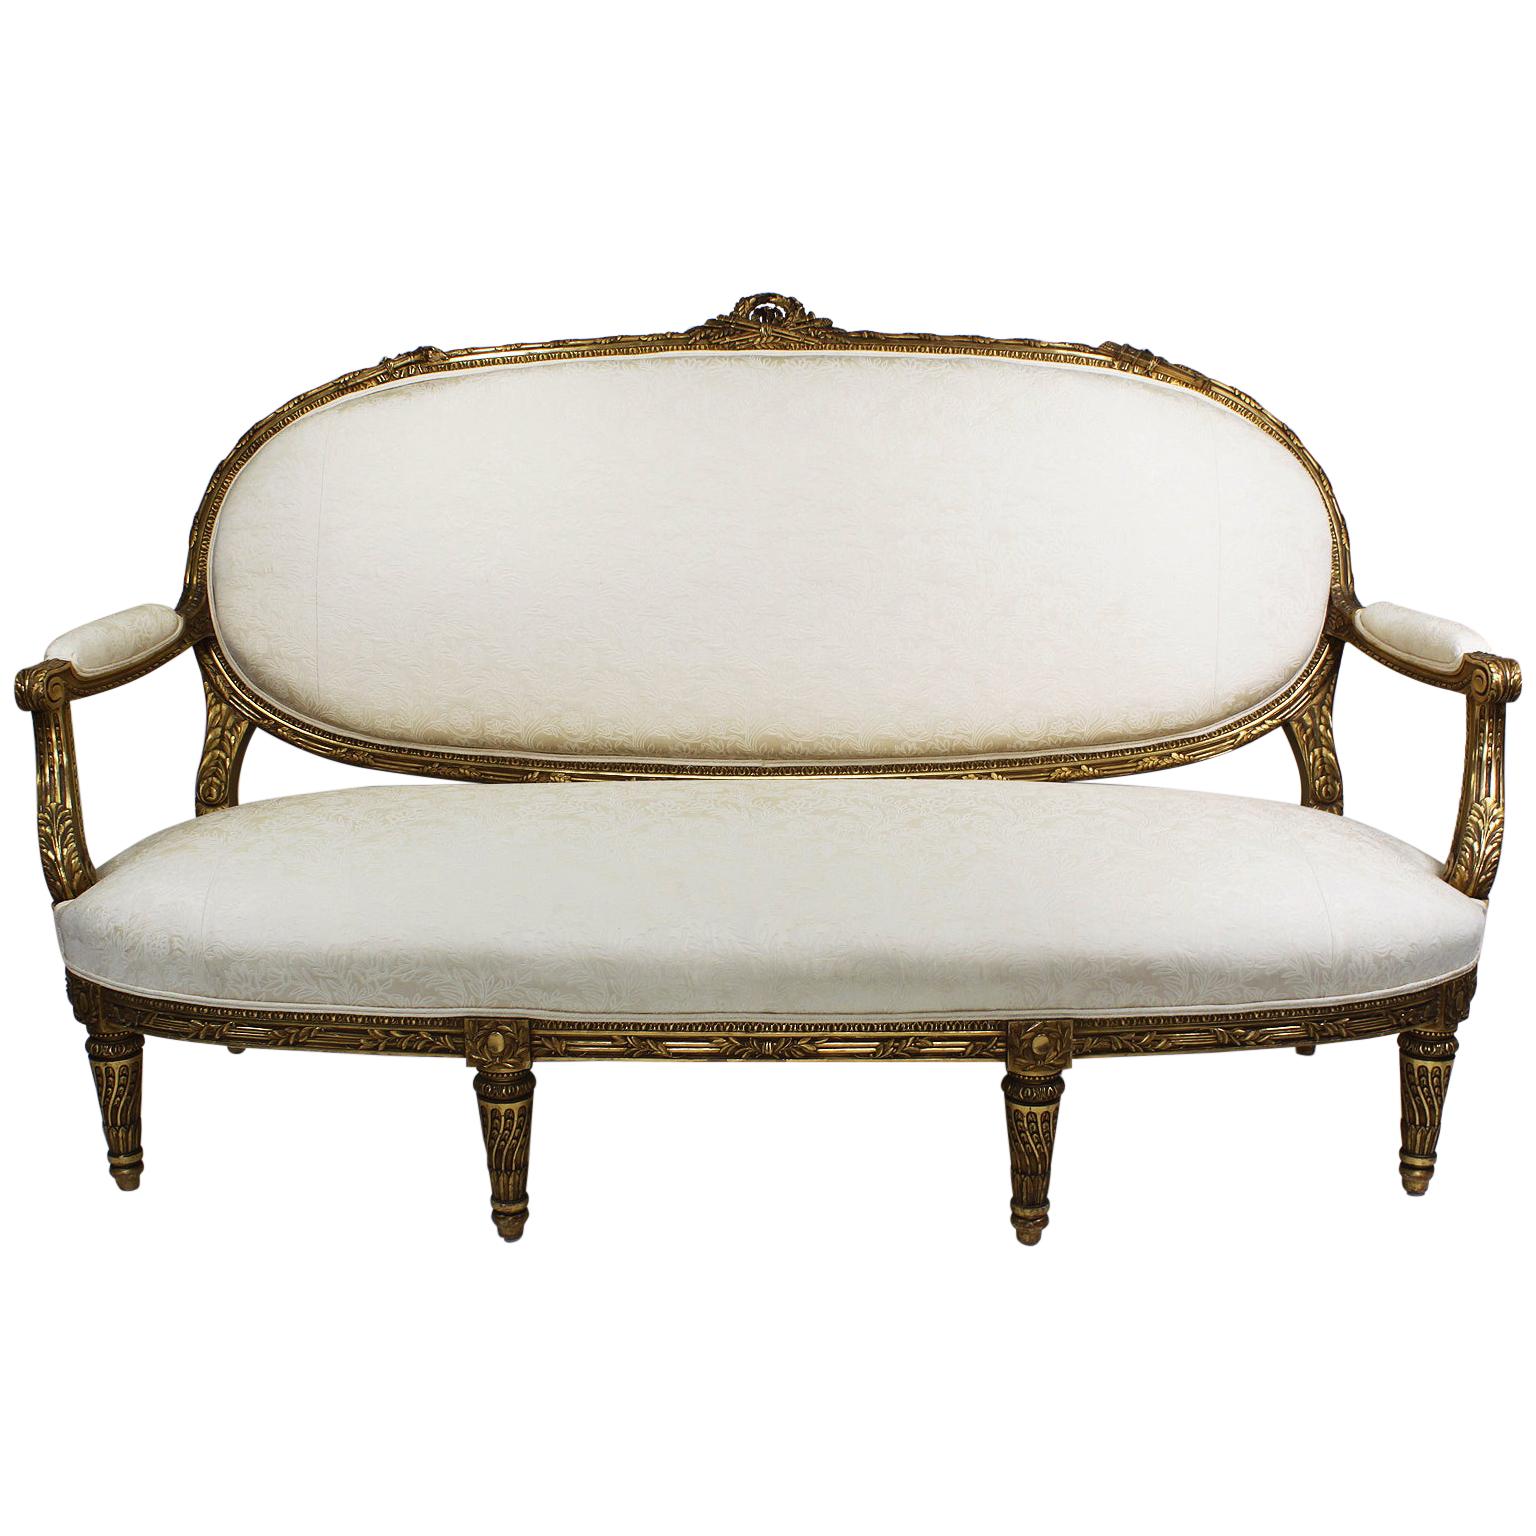 French 19th-20th Century Louis XVI Style Giltwood Carved Settee, François Linke